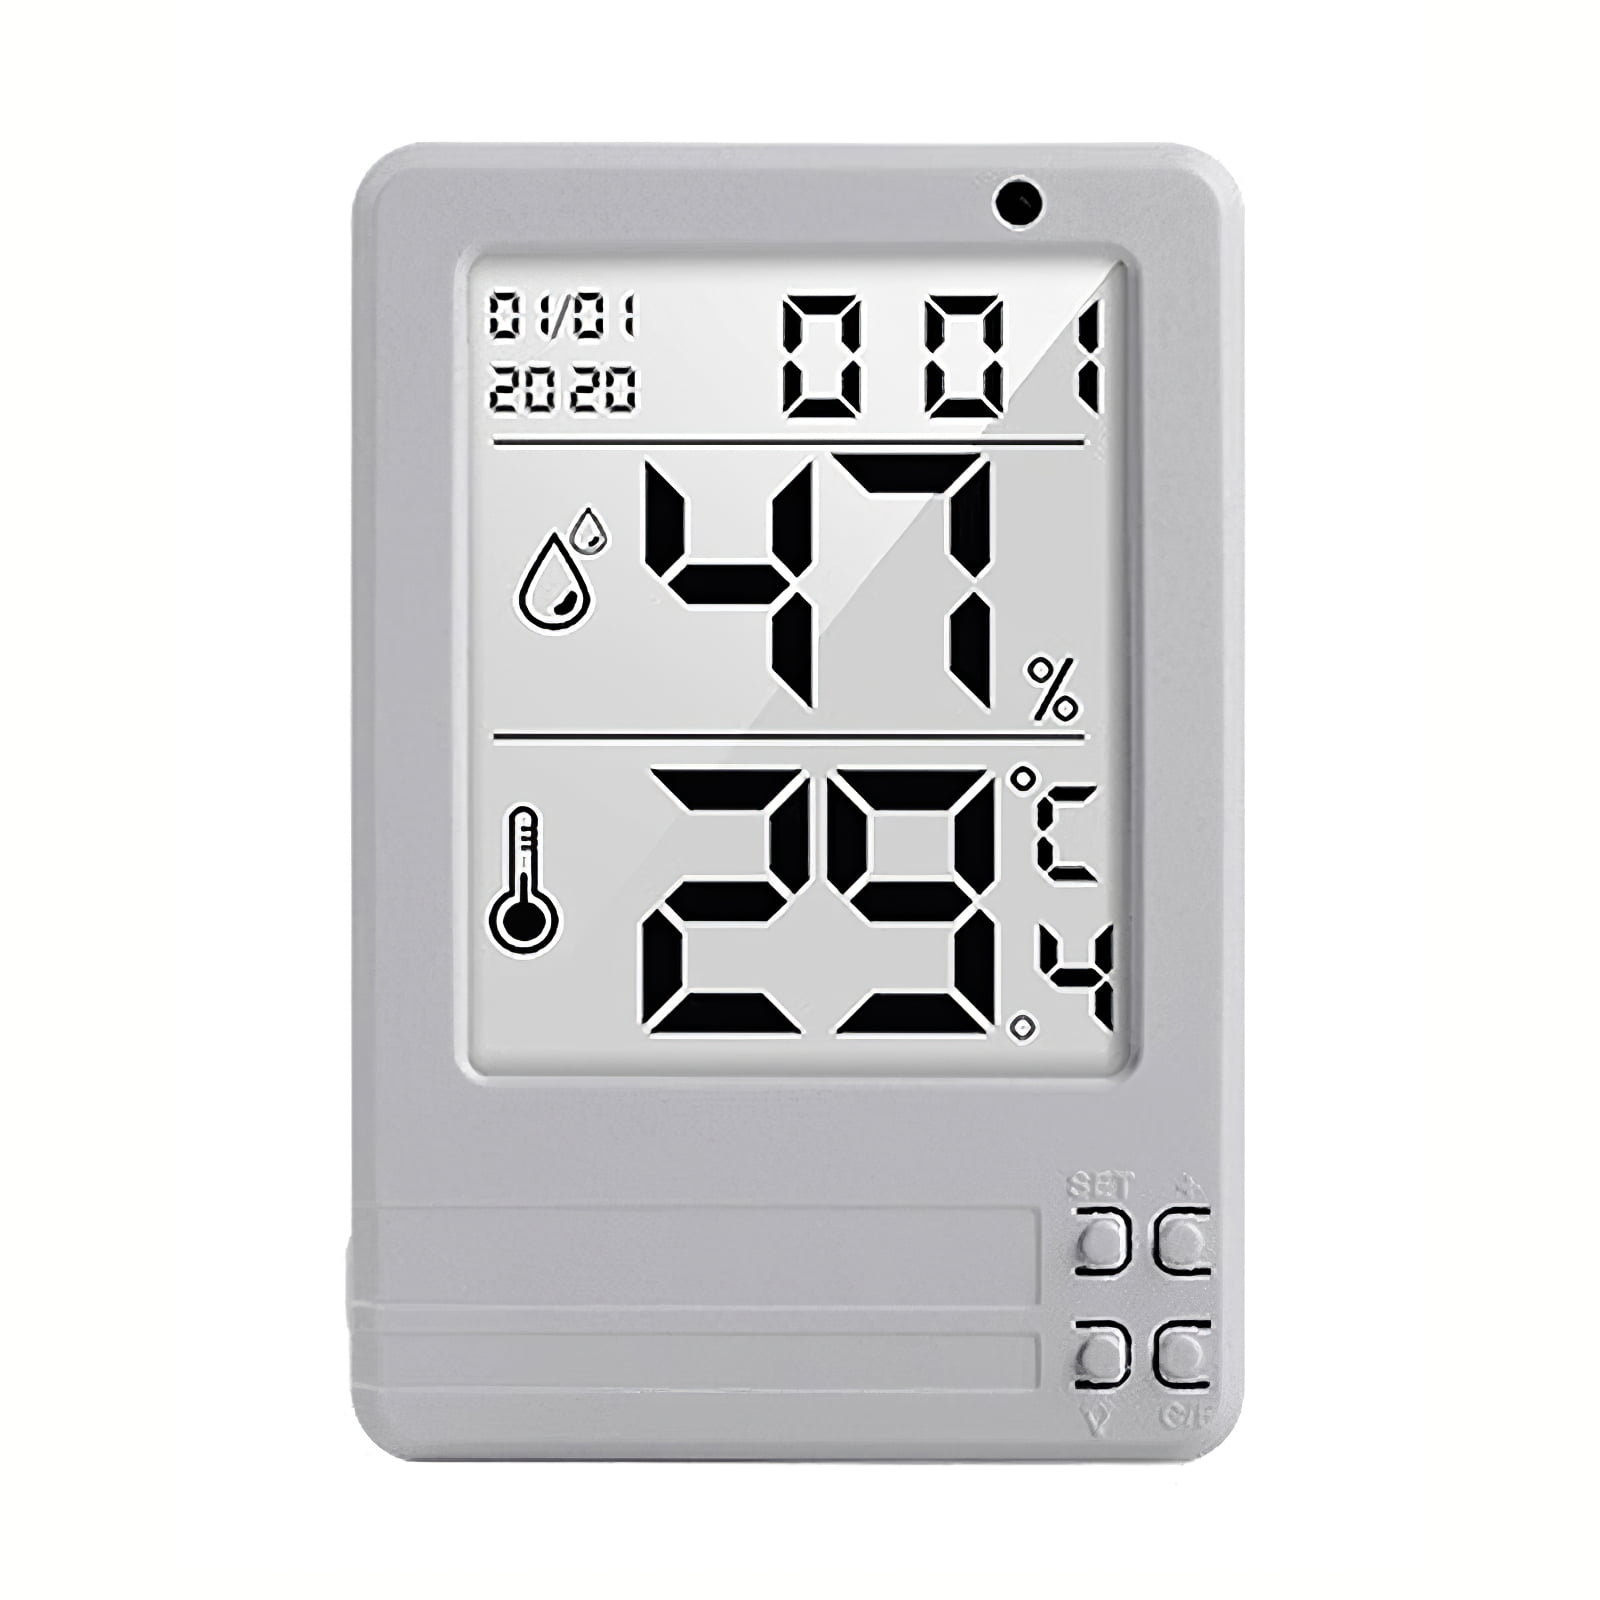 Details about   Wall Mounted Temperature Humidity Meter Thermometer and Hygrometer For Household 